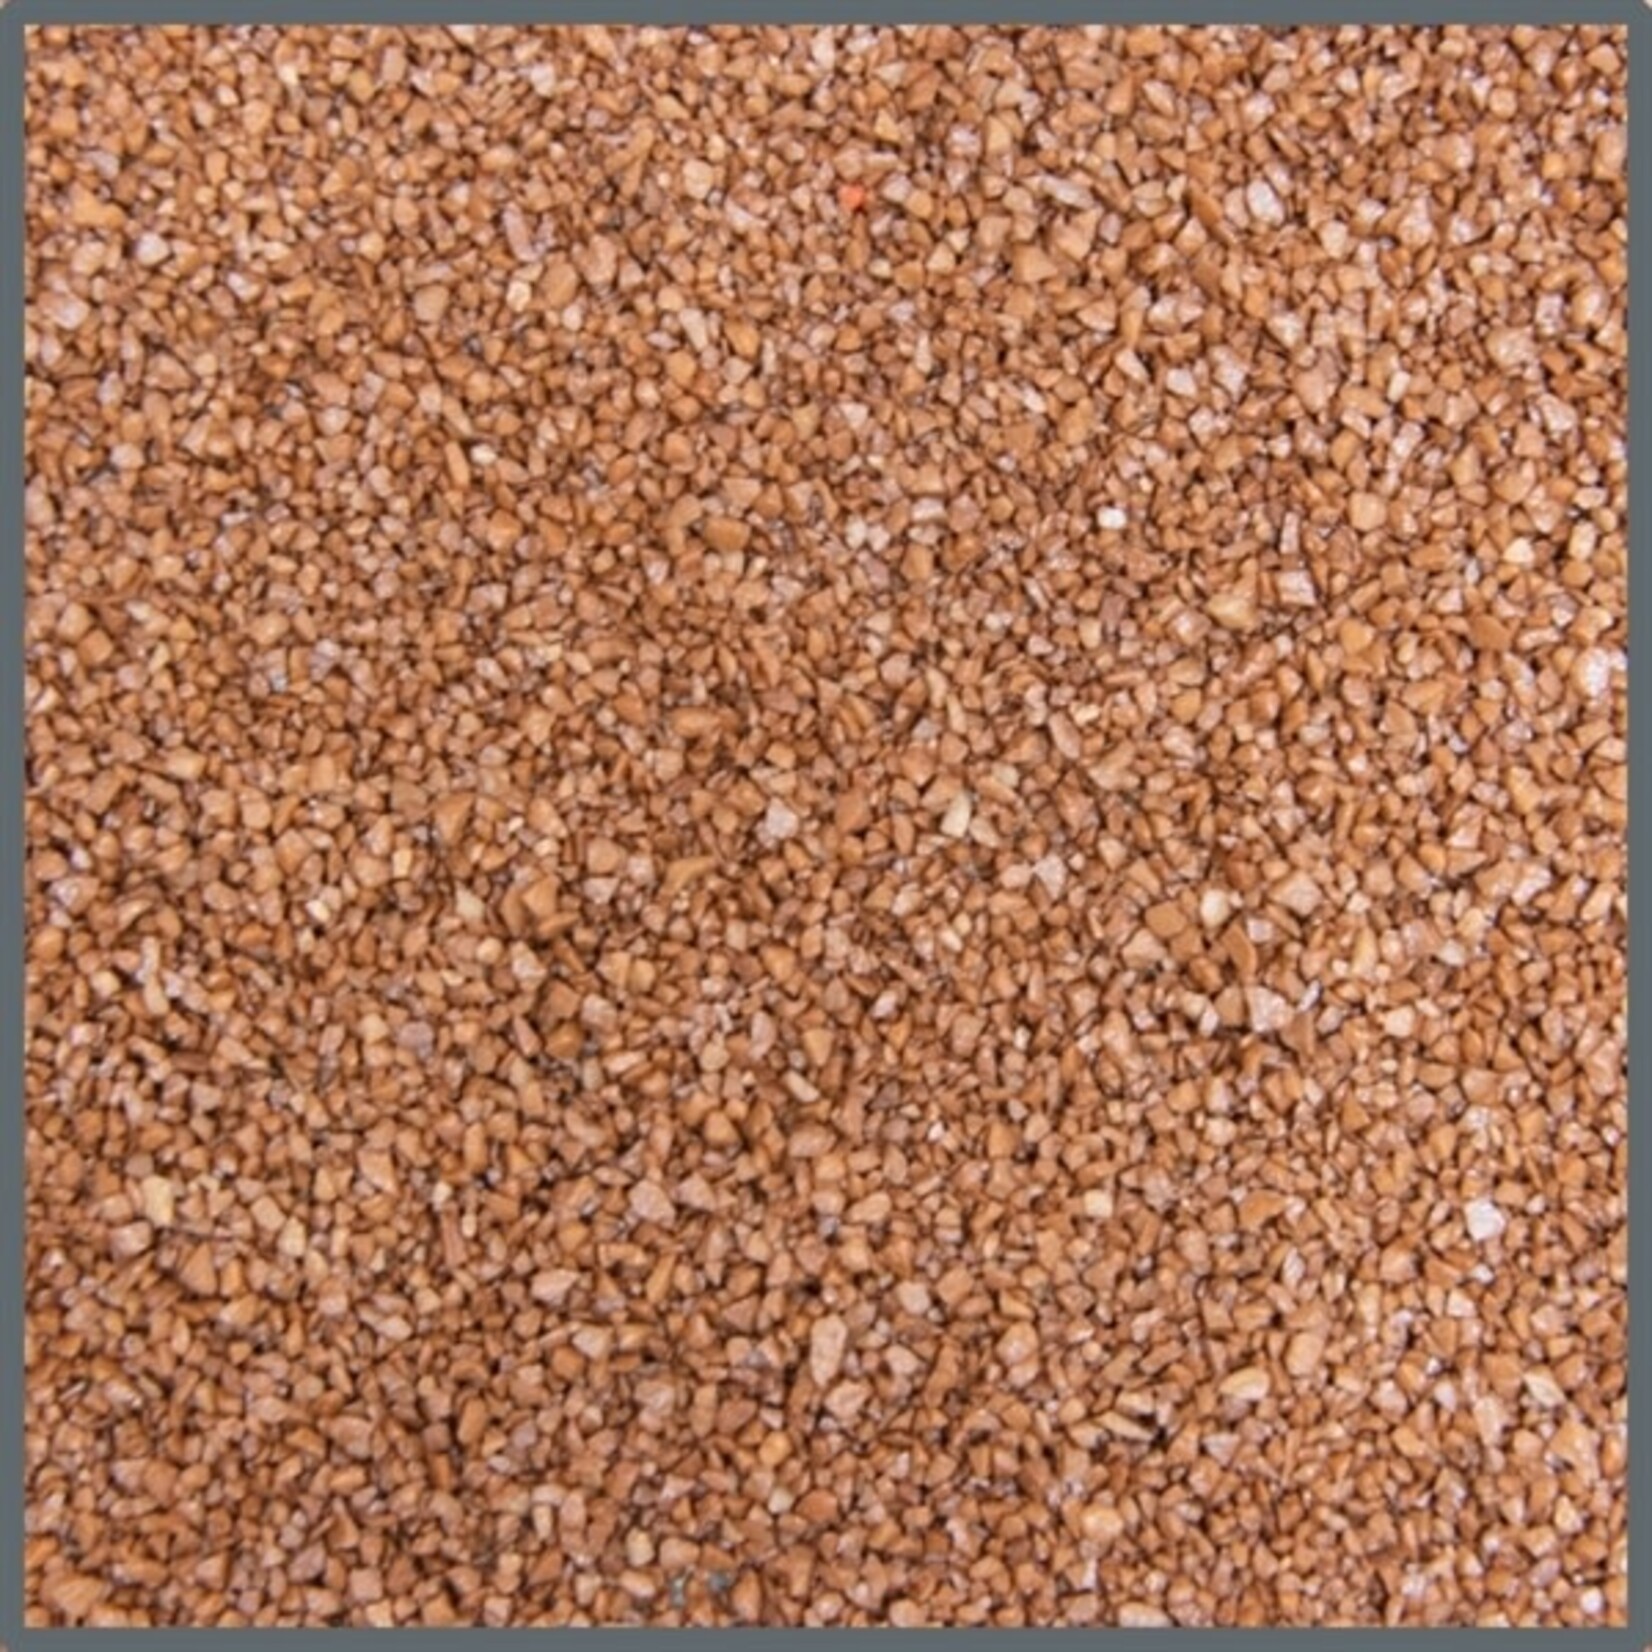 Dupla DUPLA GROUND COLOUR BROWN EARTH 0.5-1.4 MM 10 KG